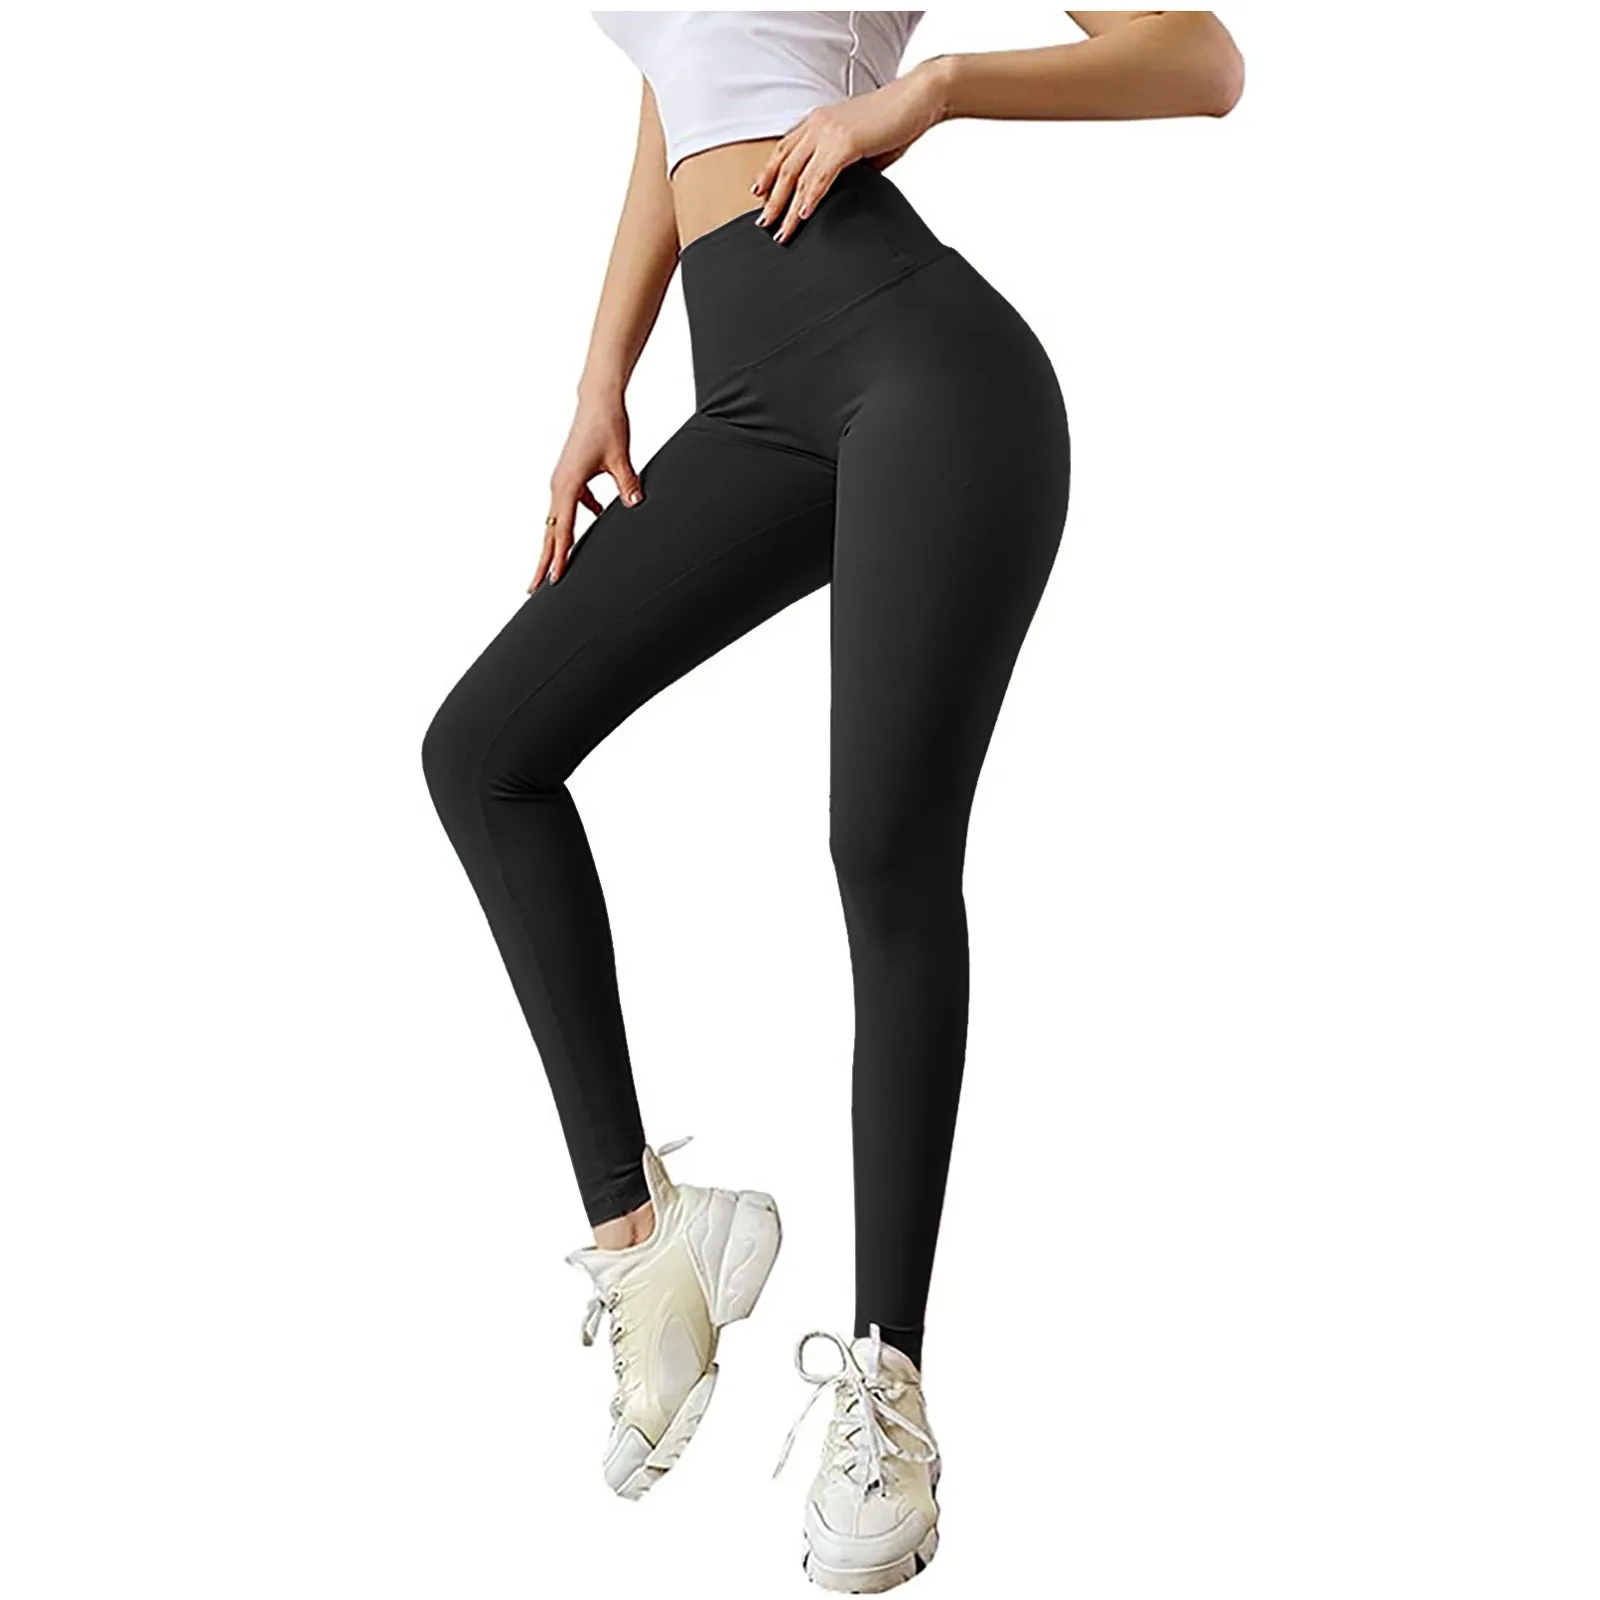 Women Seamless Fitness Legg Ings Fashionable Casual Solid High Waist ...